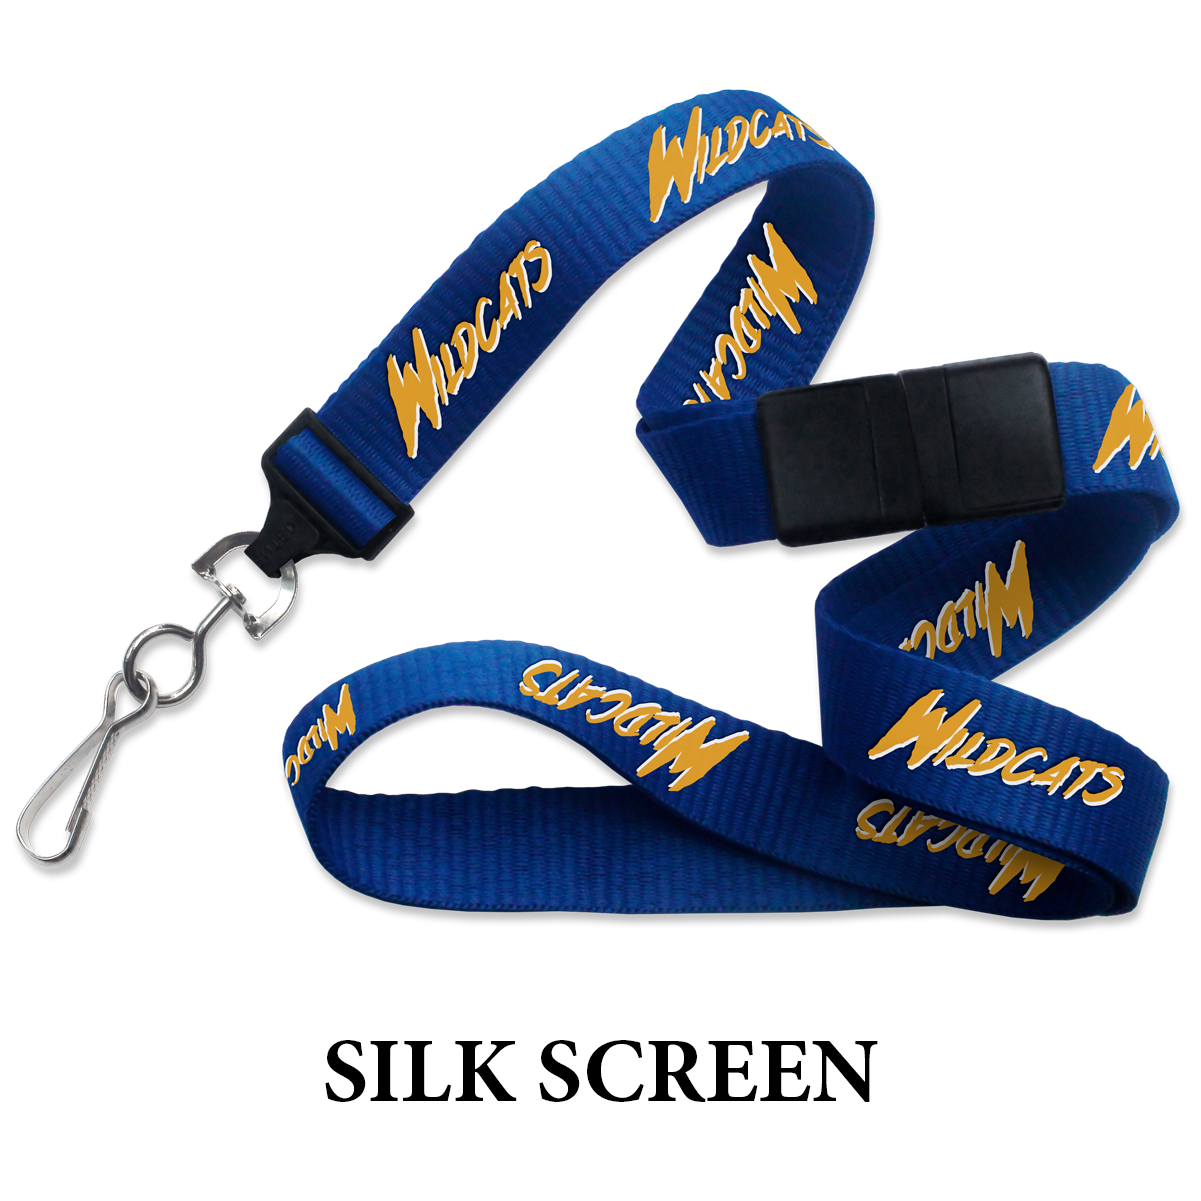 Custom printed lanyards - silk screen printing for company logo, corporate events and more